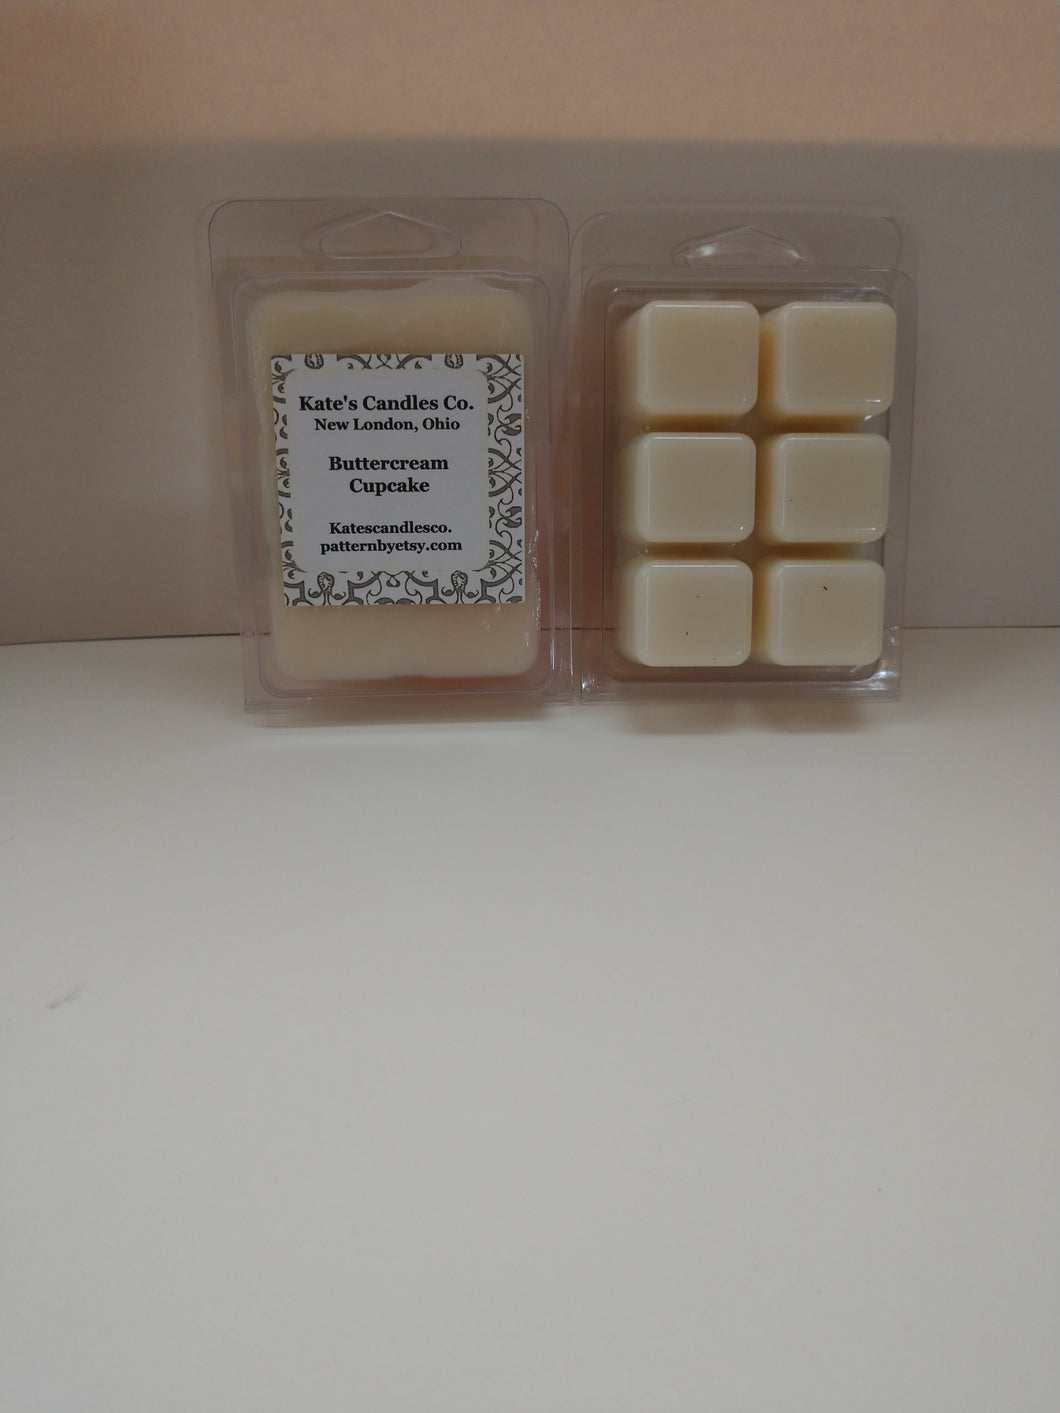 Buttercream Cupcake Soy Wax Melts - Kate's Candles Co. Soy Candles